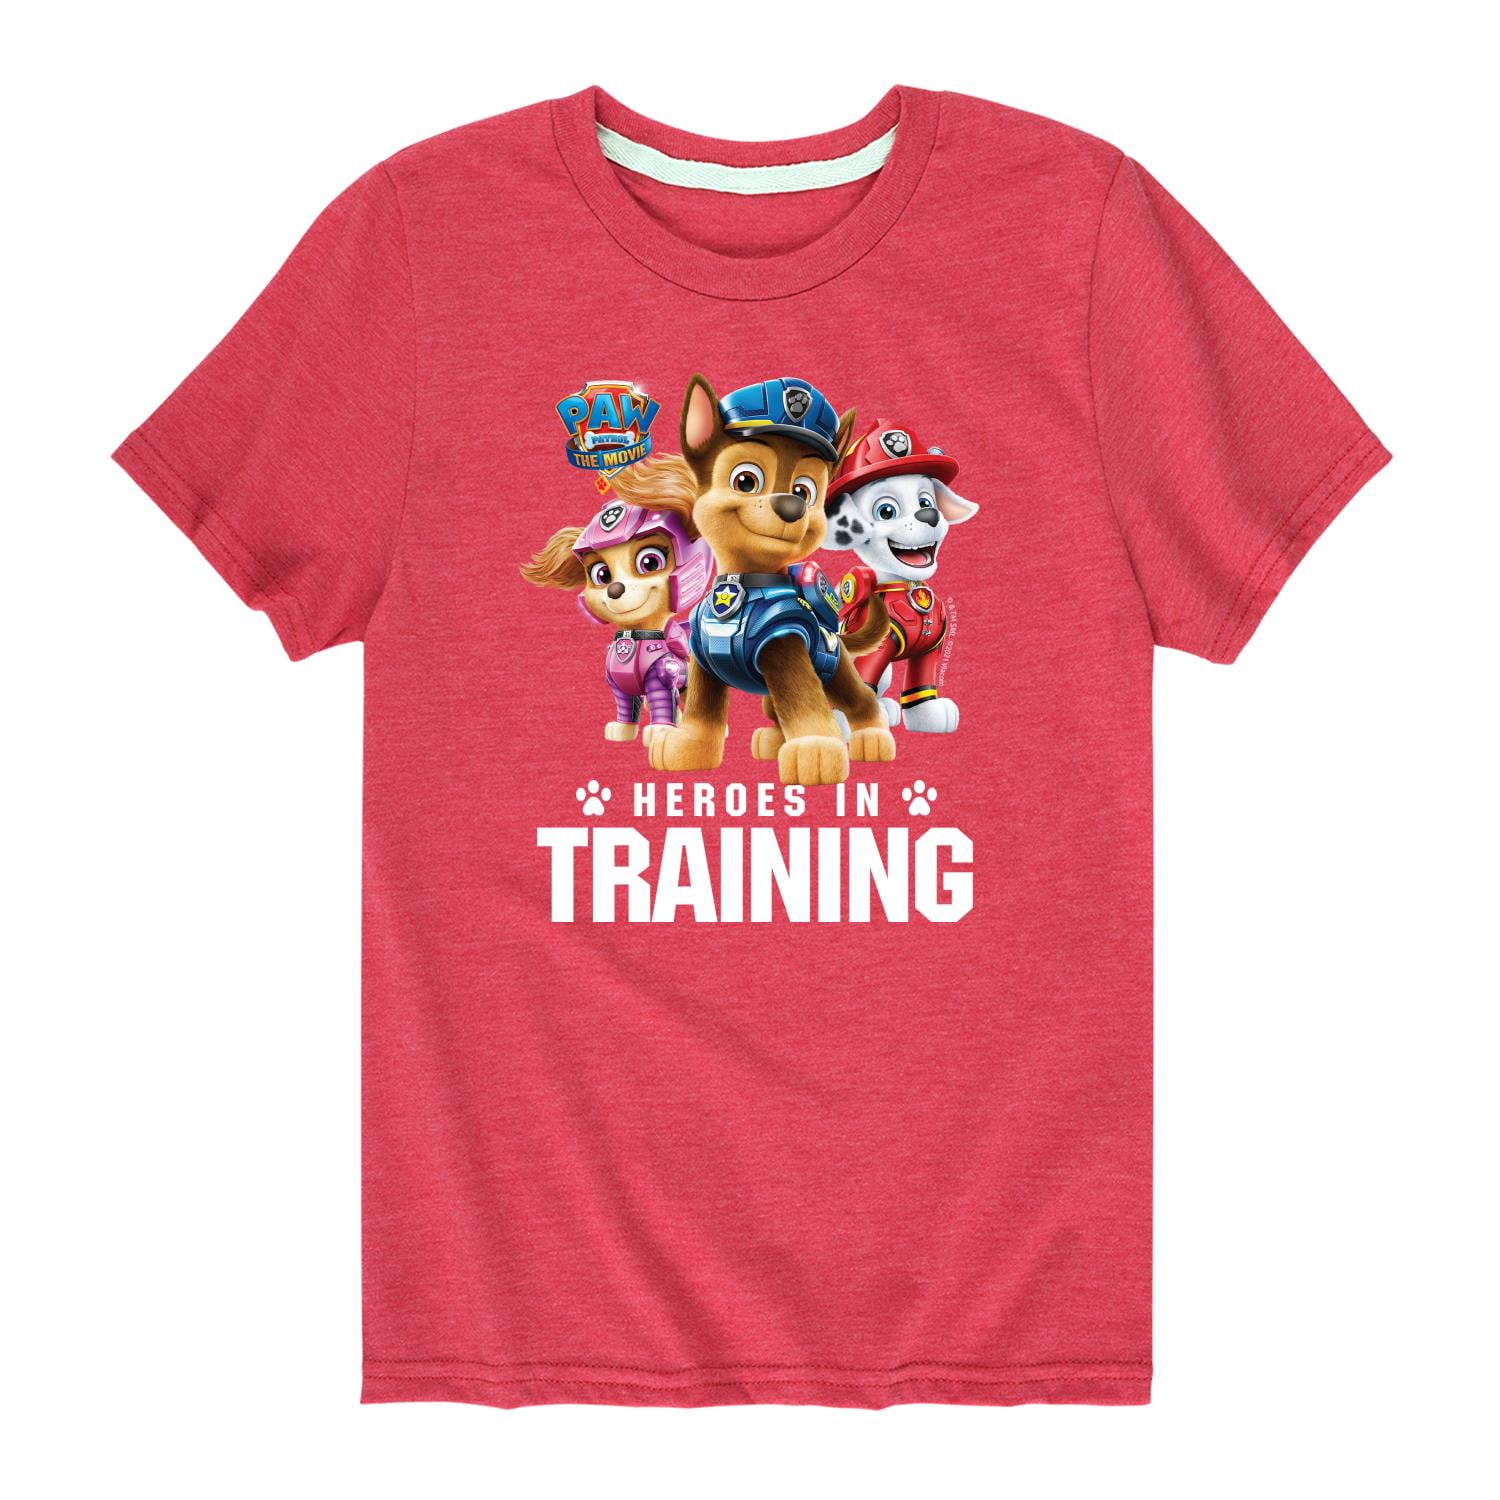 Paw And Patrol Graphic Shirt Movie - T- Youth Toddler Short Patrol Sleeve Paw -